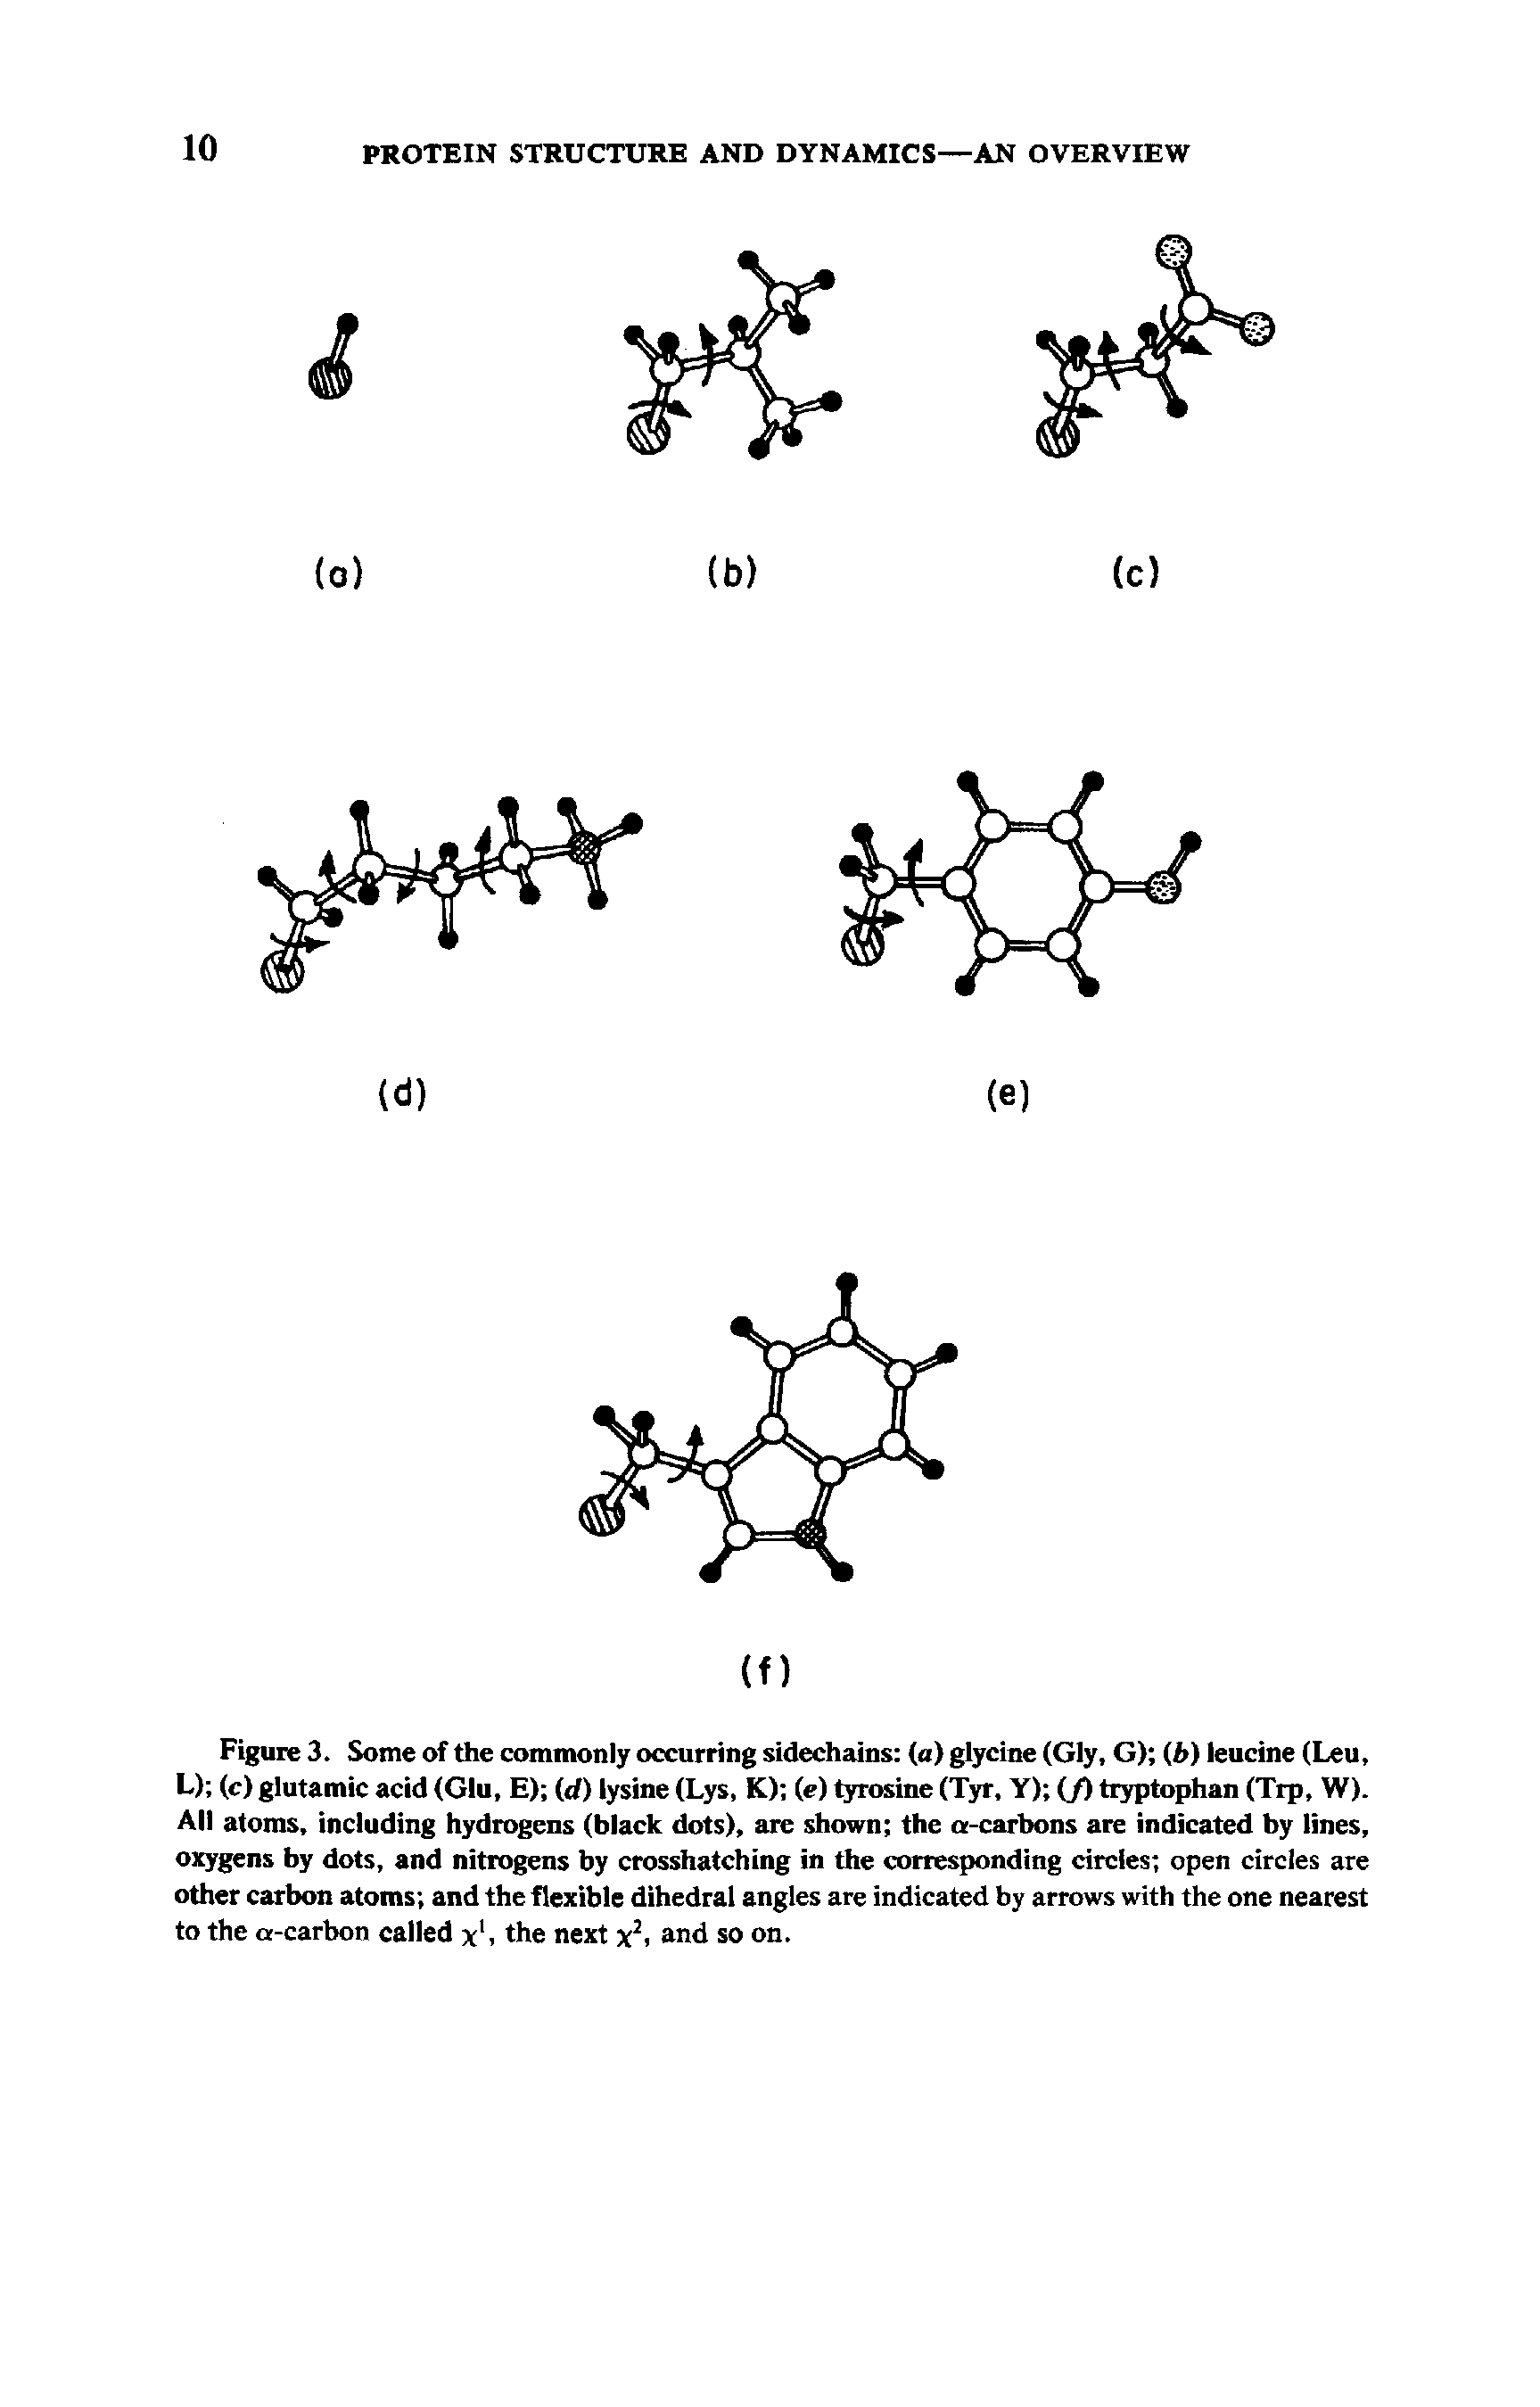 Figure 3. Some of the commonly occurring sidechains (a) glycine (Gly, G) (A) leucine (Leu, L) (c) glutamic acid (Glu, E) (d) lysine (Lys, K) (e) tyrosine (Tyr, Y) (/) tryptophan (Tip, W). All atoms, including hydrogens (black dots), are shown the a-carbons are indicated by lines, oxygens by dots, and nitrogens by crosshatching in the corresponding circles open circles are other carbon atoms and the flexible dihedral angles are indicated by arrows with the one nearest to the a-carbon called x1, the next x2> and so on.